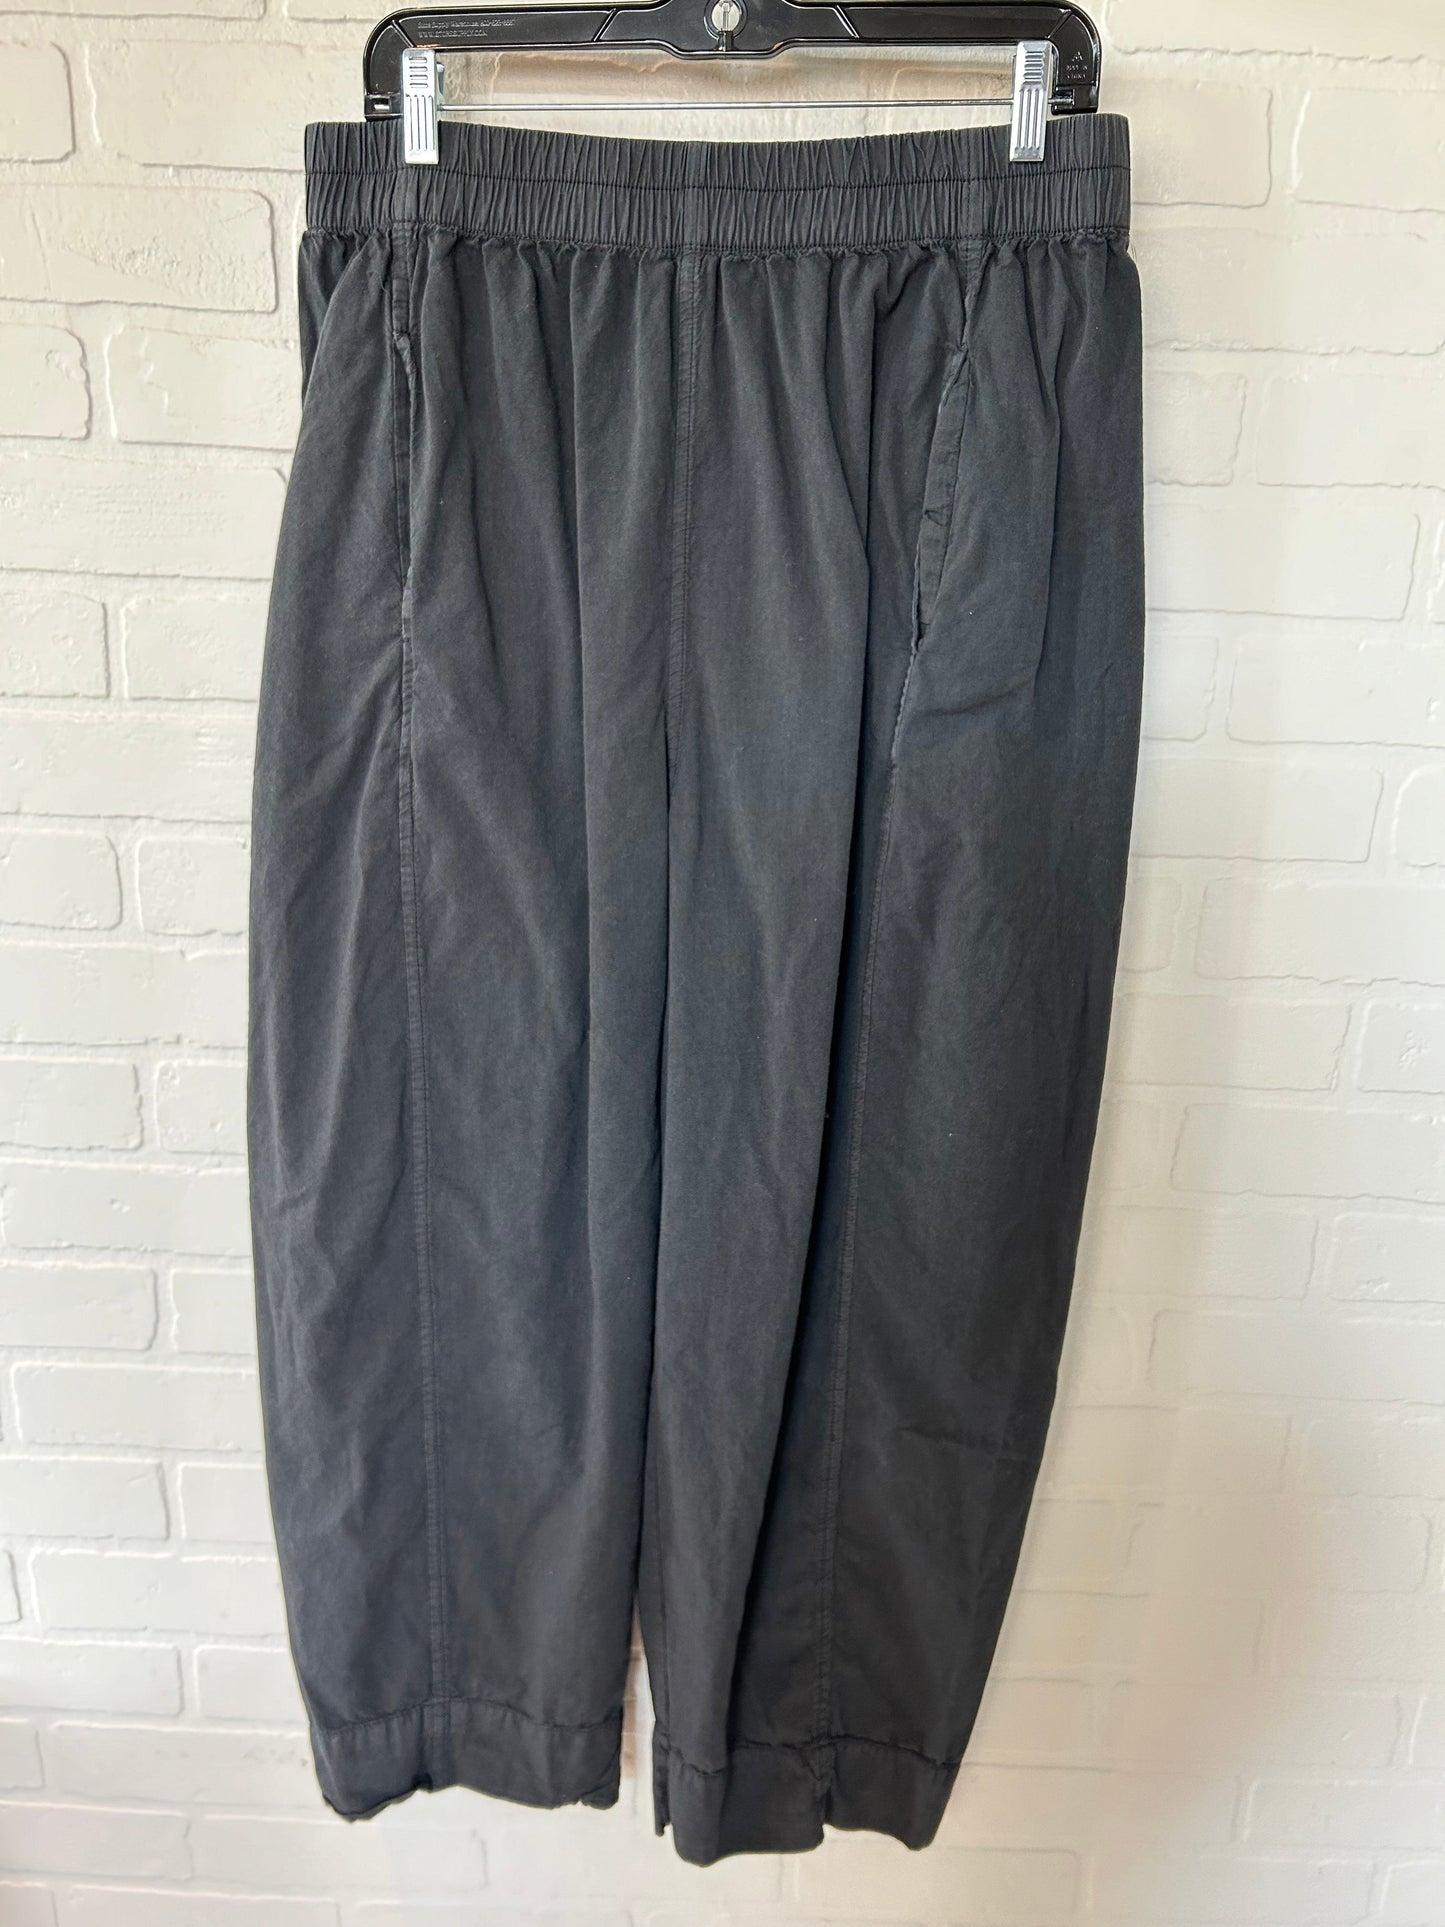 Grey Pants Other Free People, Size 12